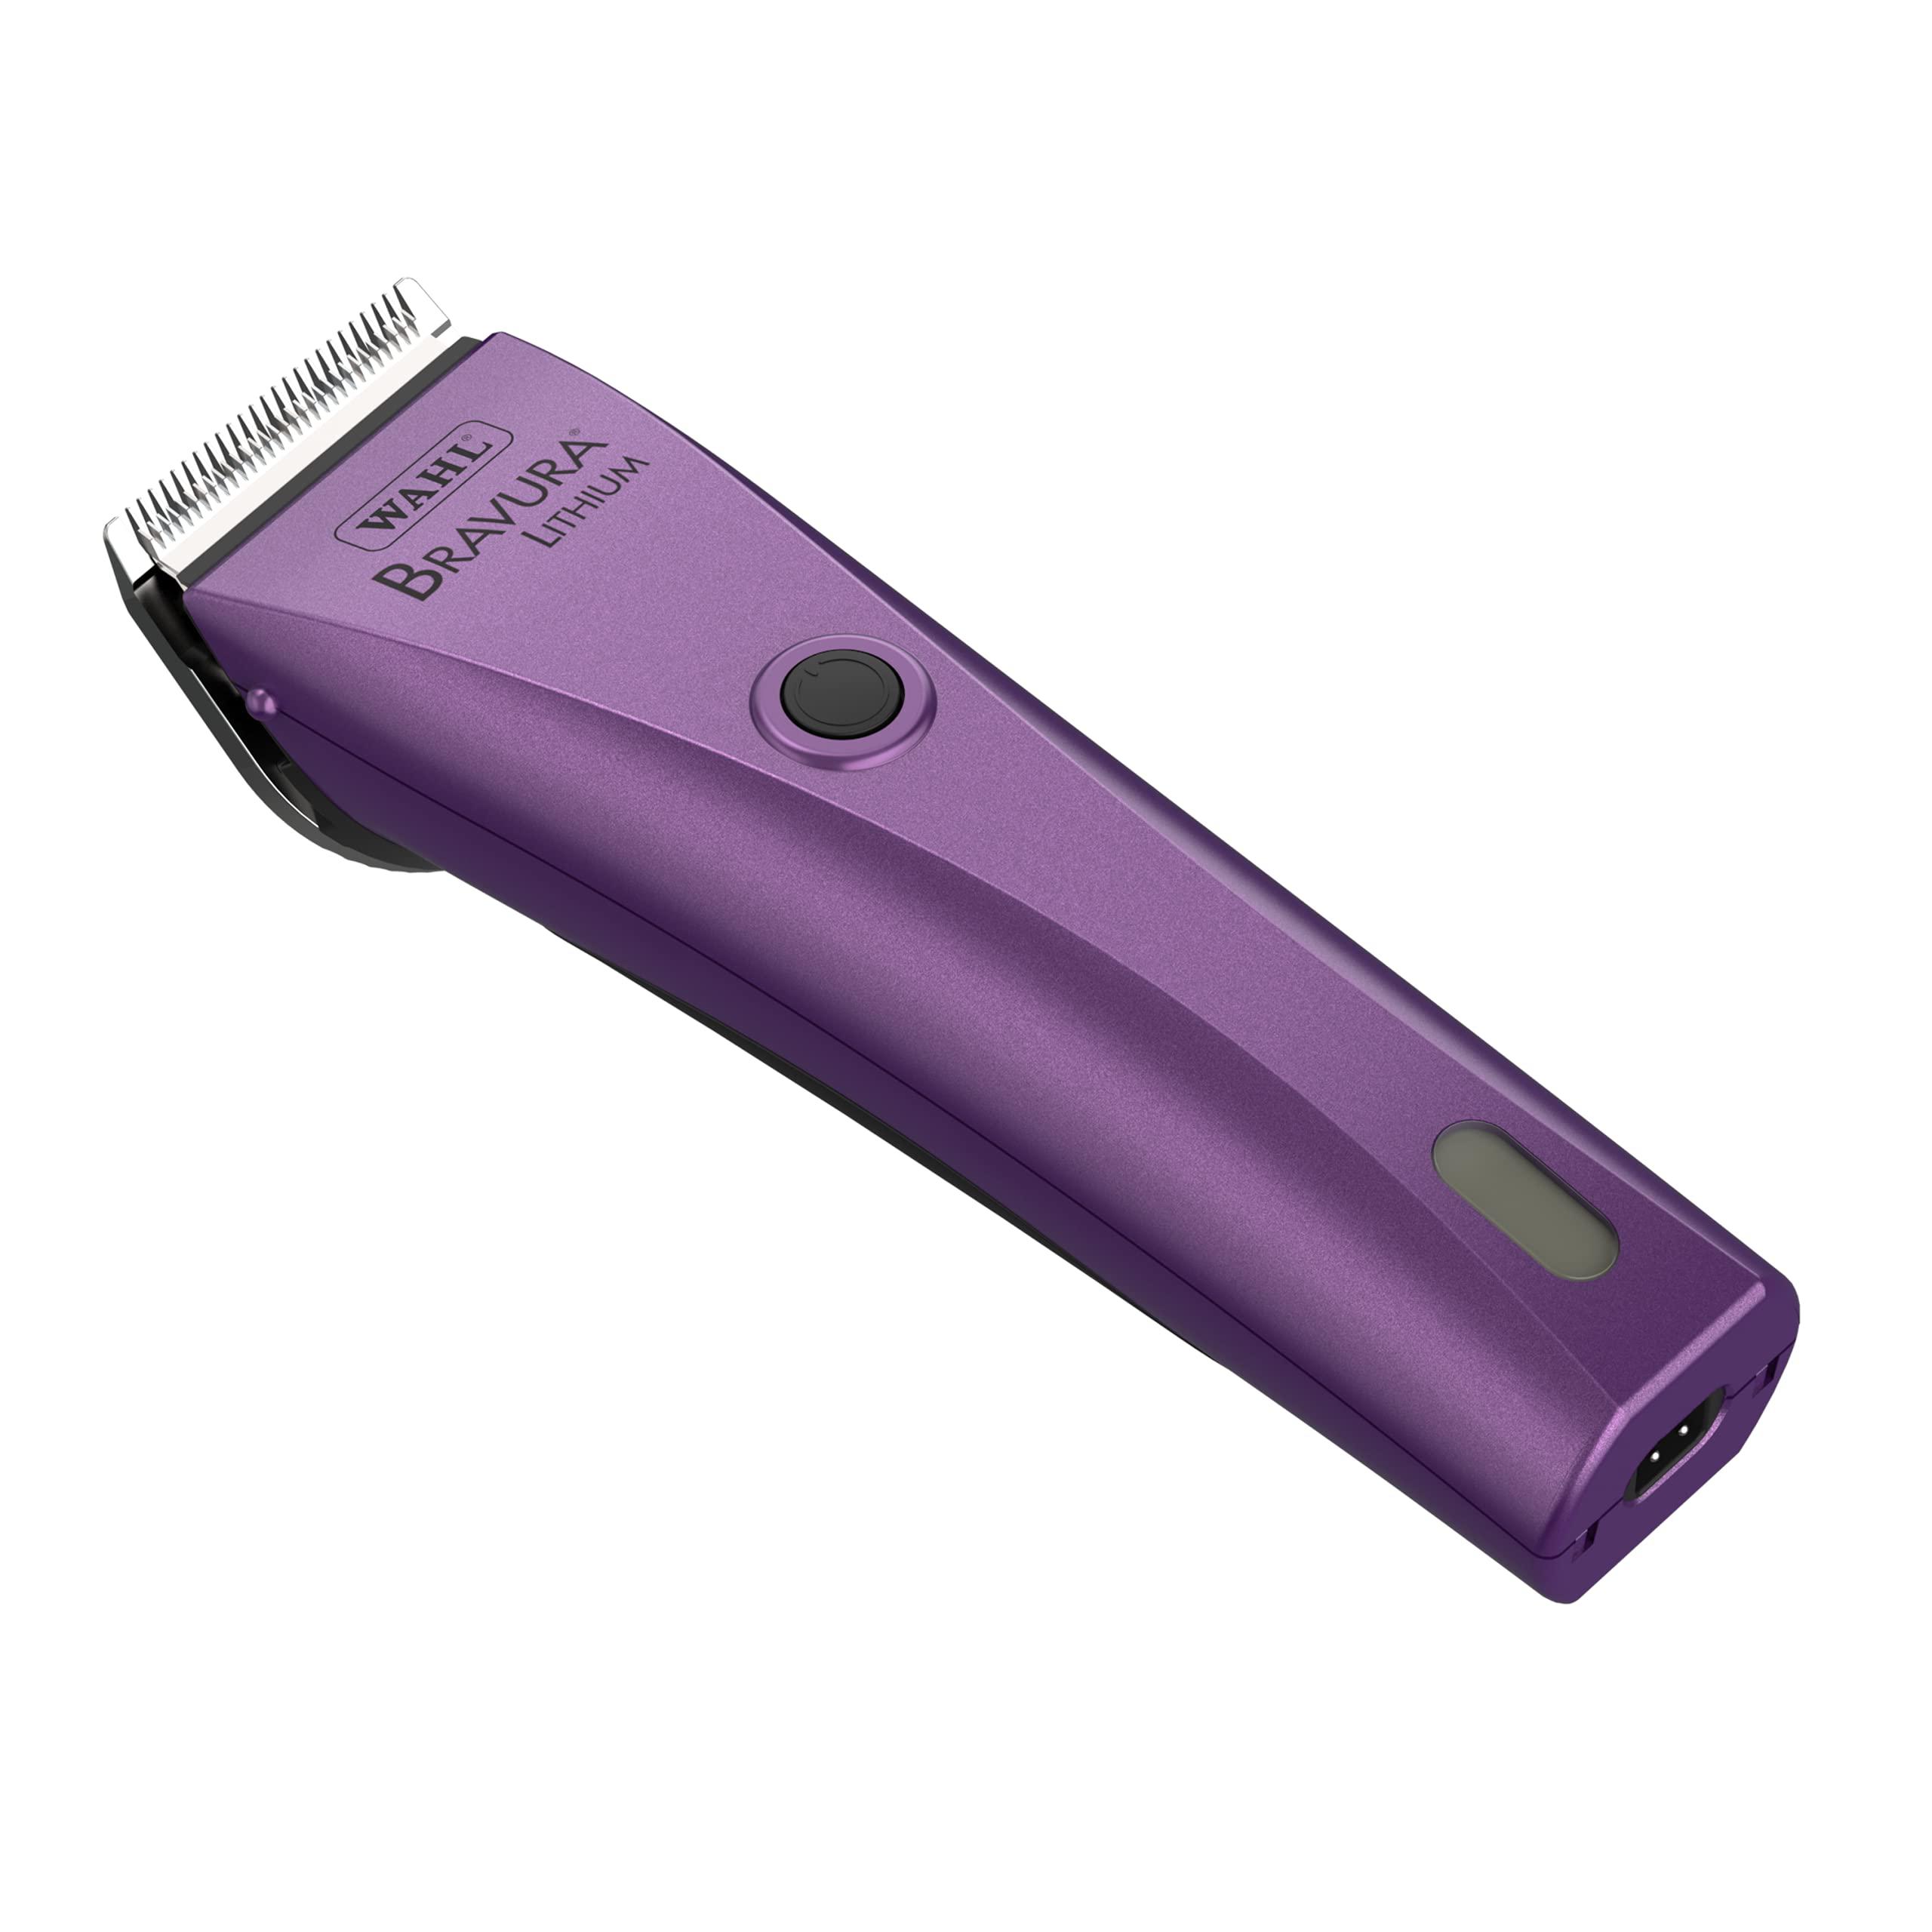 wahl professional animal bravura lithium ion clipper - pet, dog, cat, and horse corded/cordless clipper kit, purple (41870-04